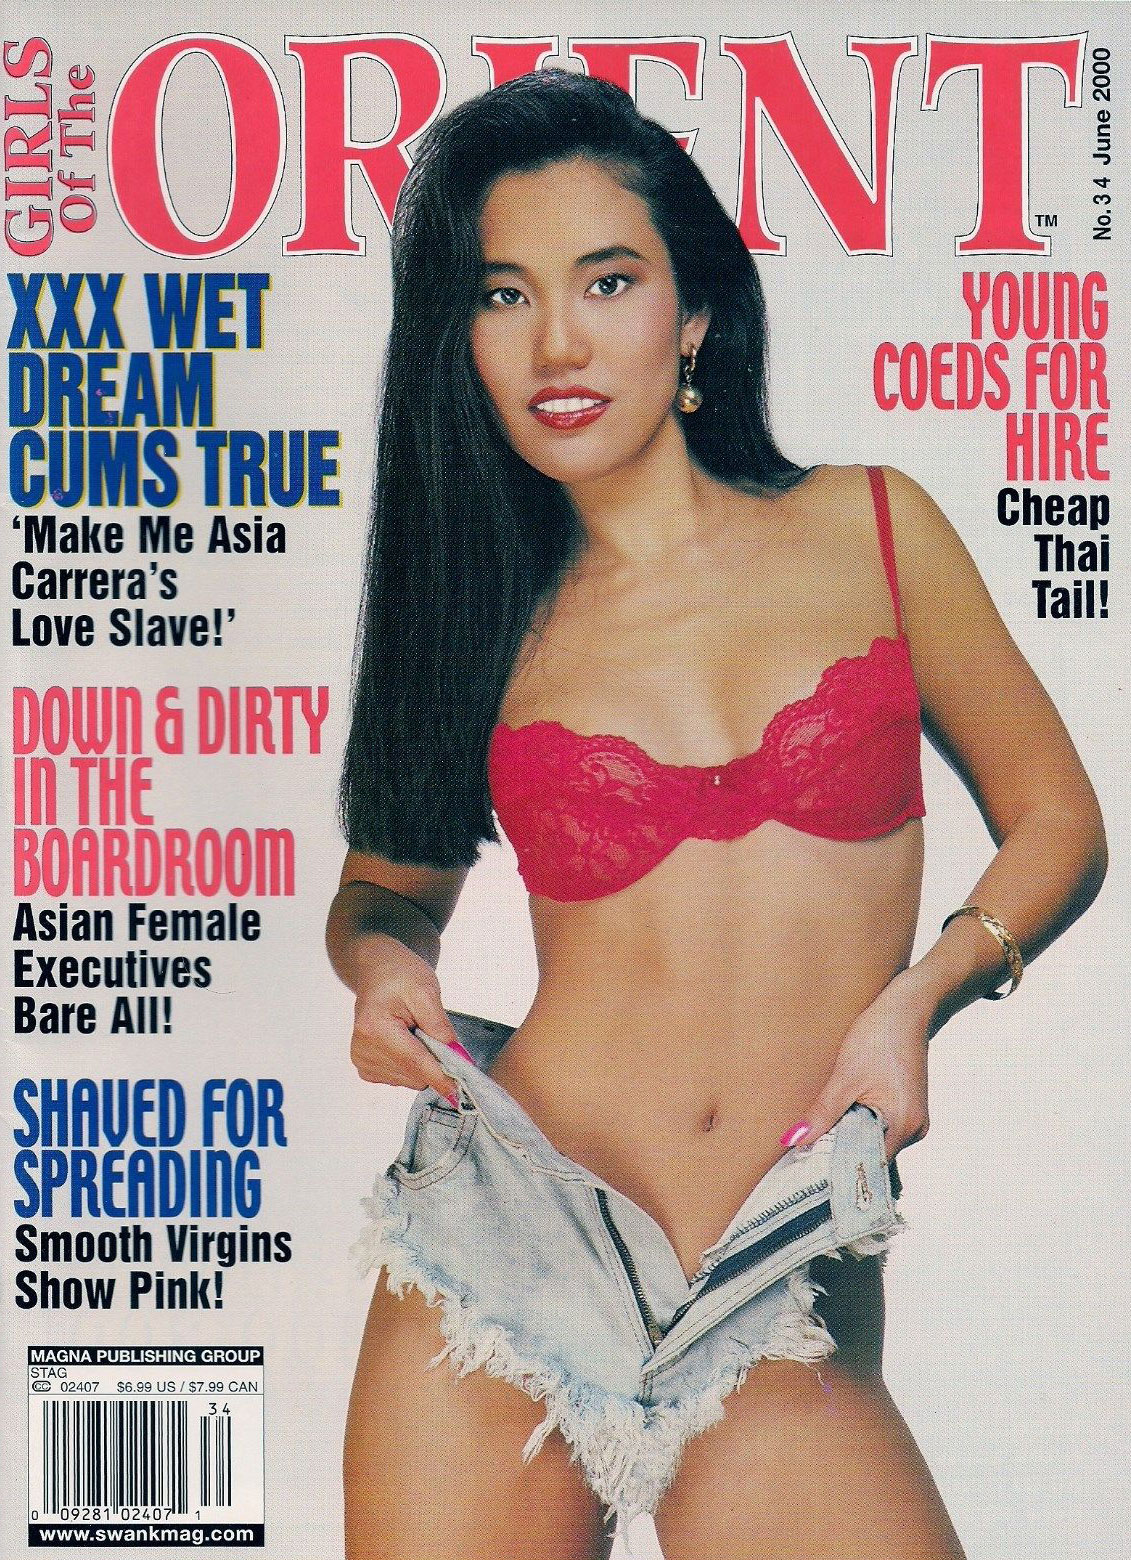 Stag # 34, June 2000 - Girls of the Orient